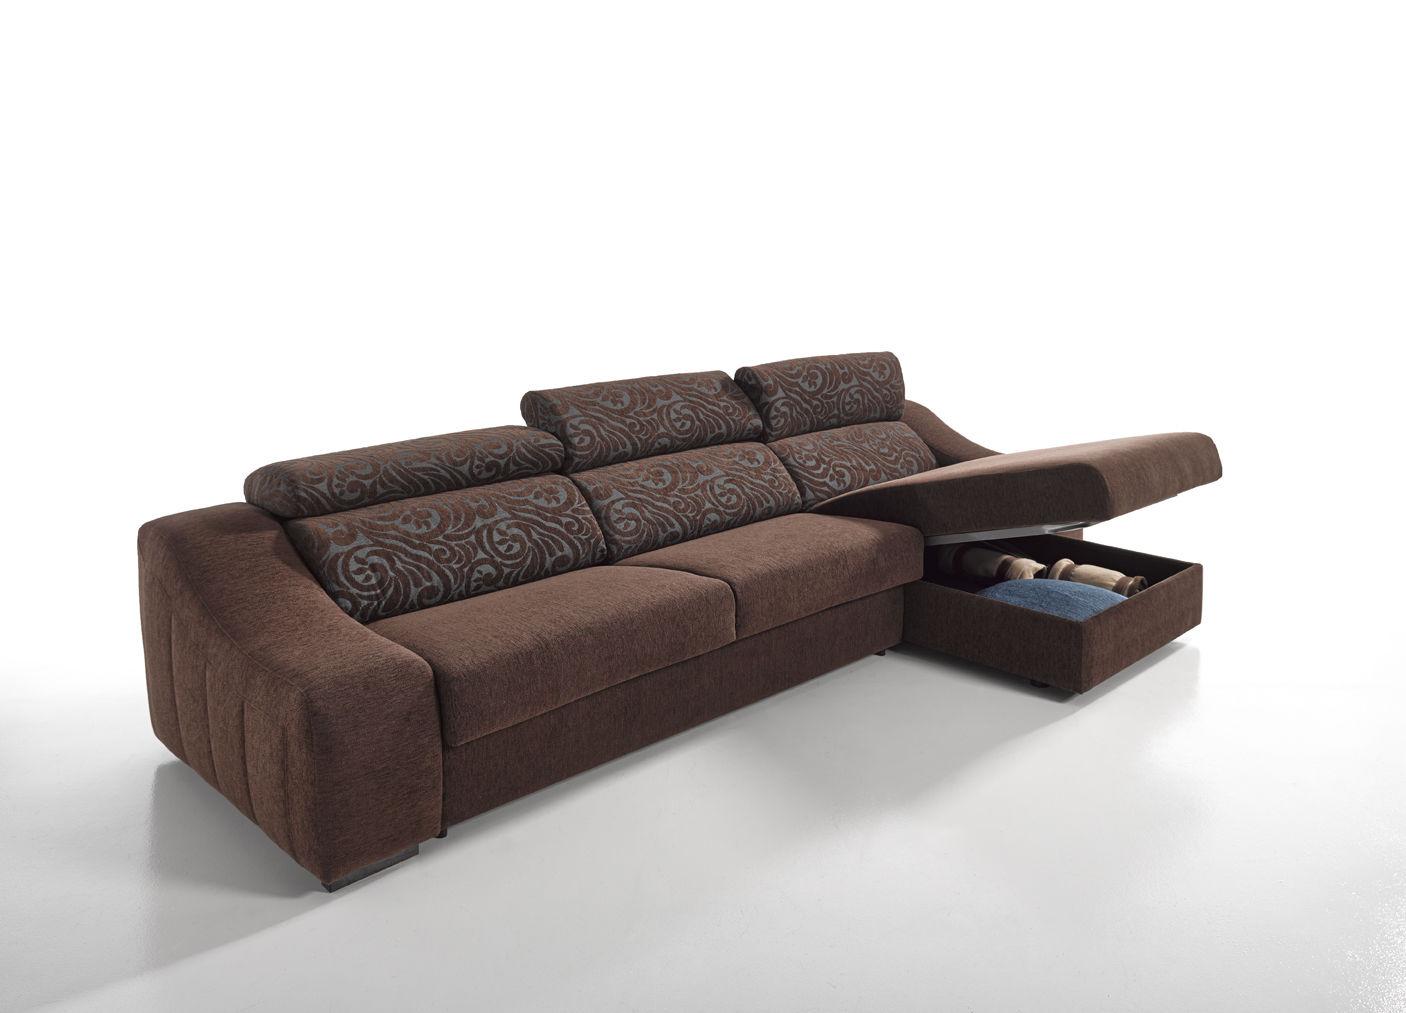 

    
ESF Ronaldo Brown Chic Fabric Right Sectional Sofa Sleeper Bed Made in Spain
